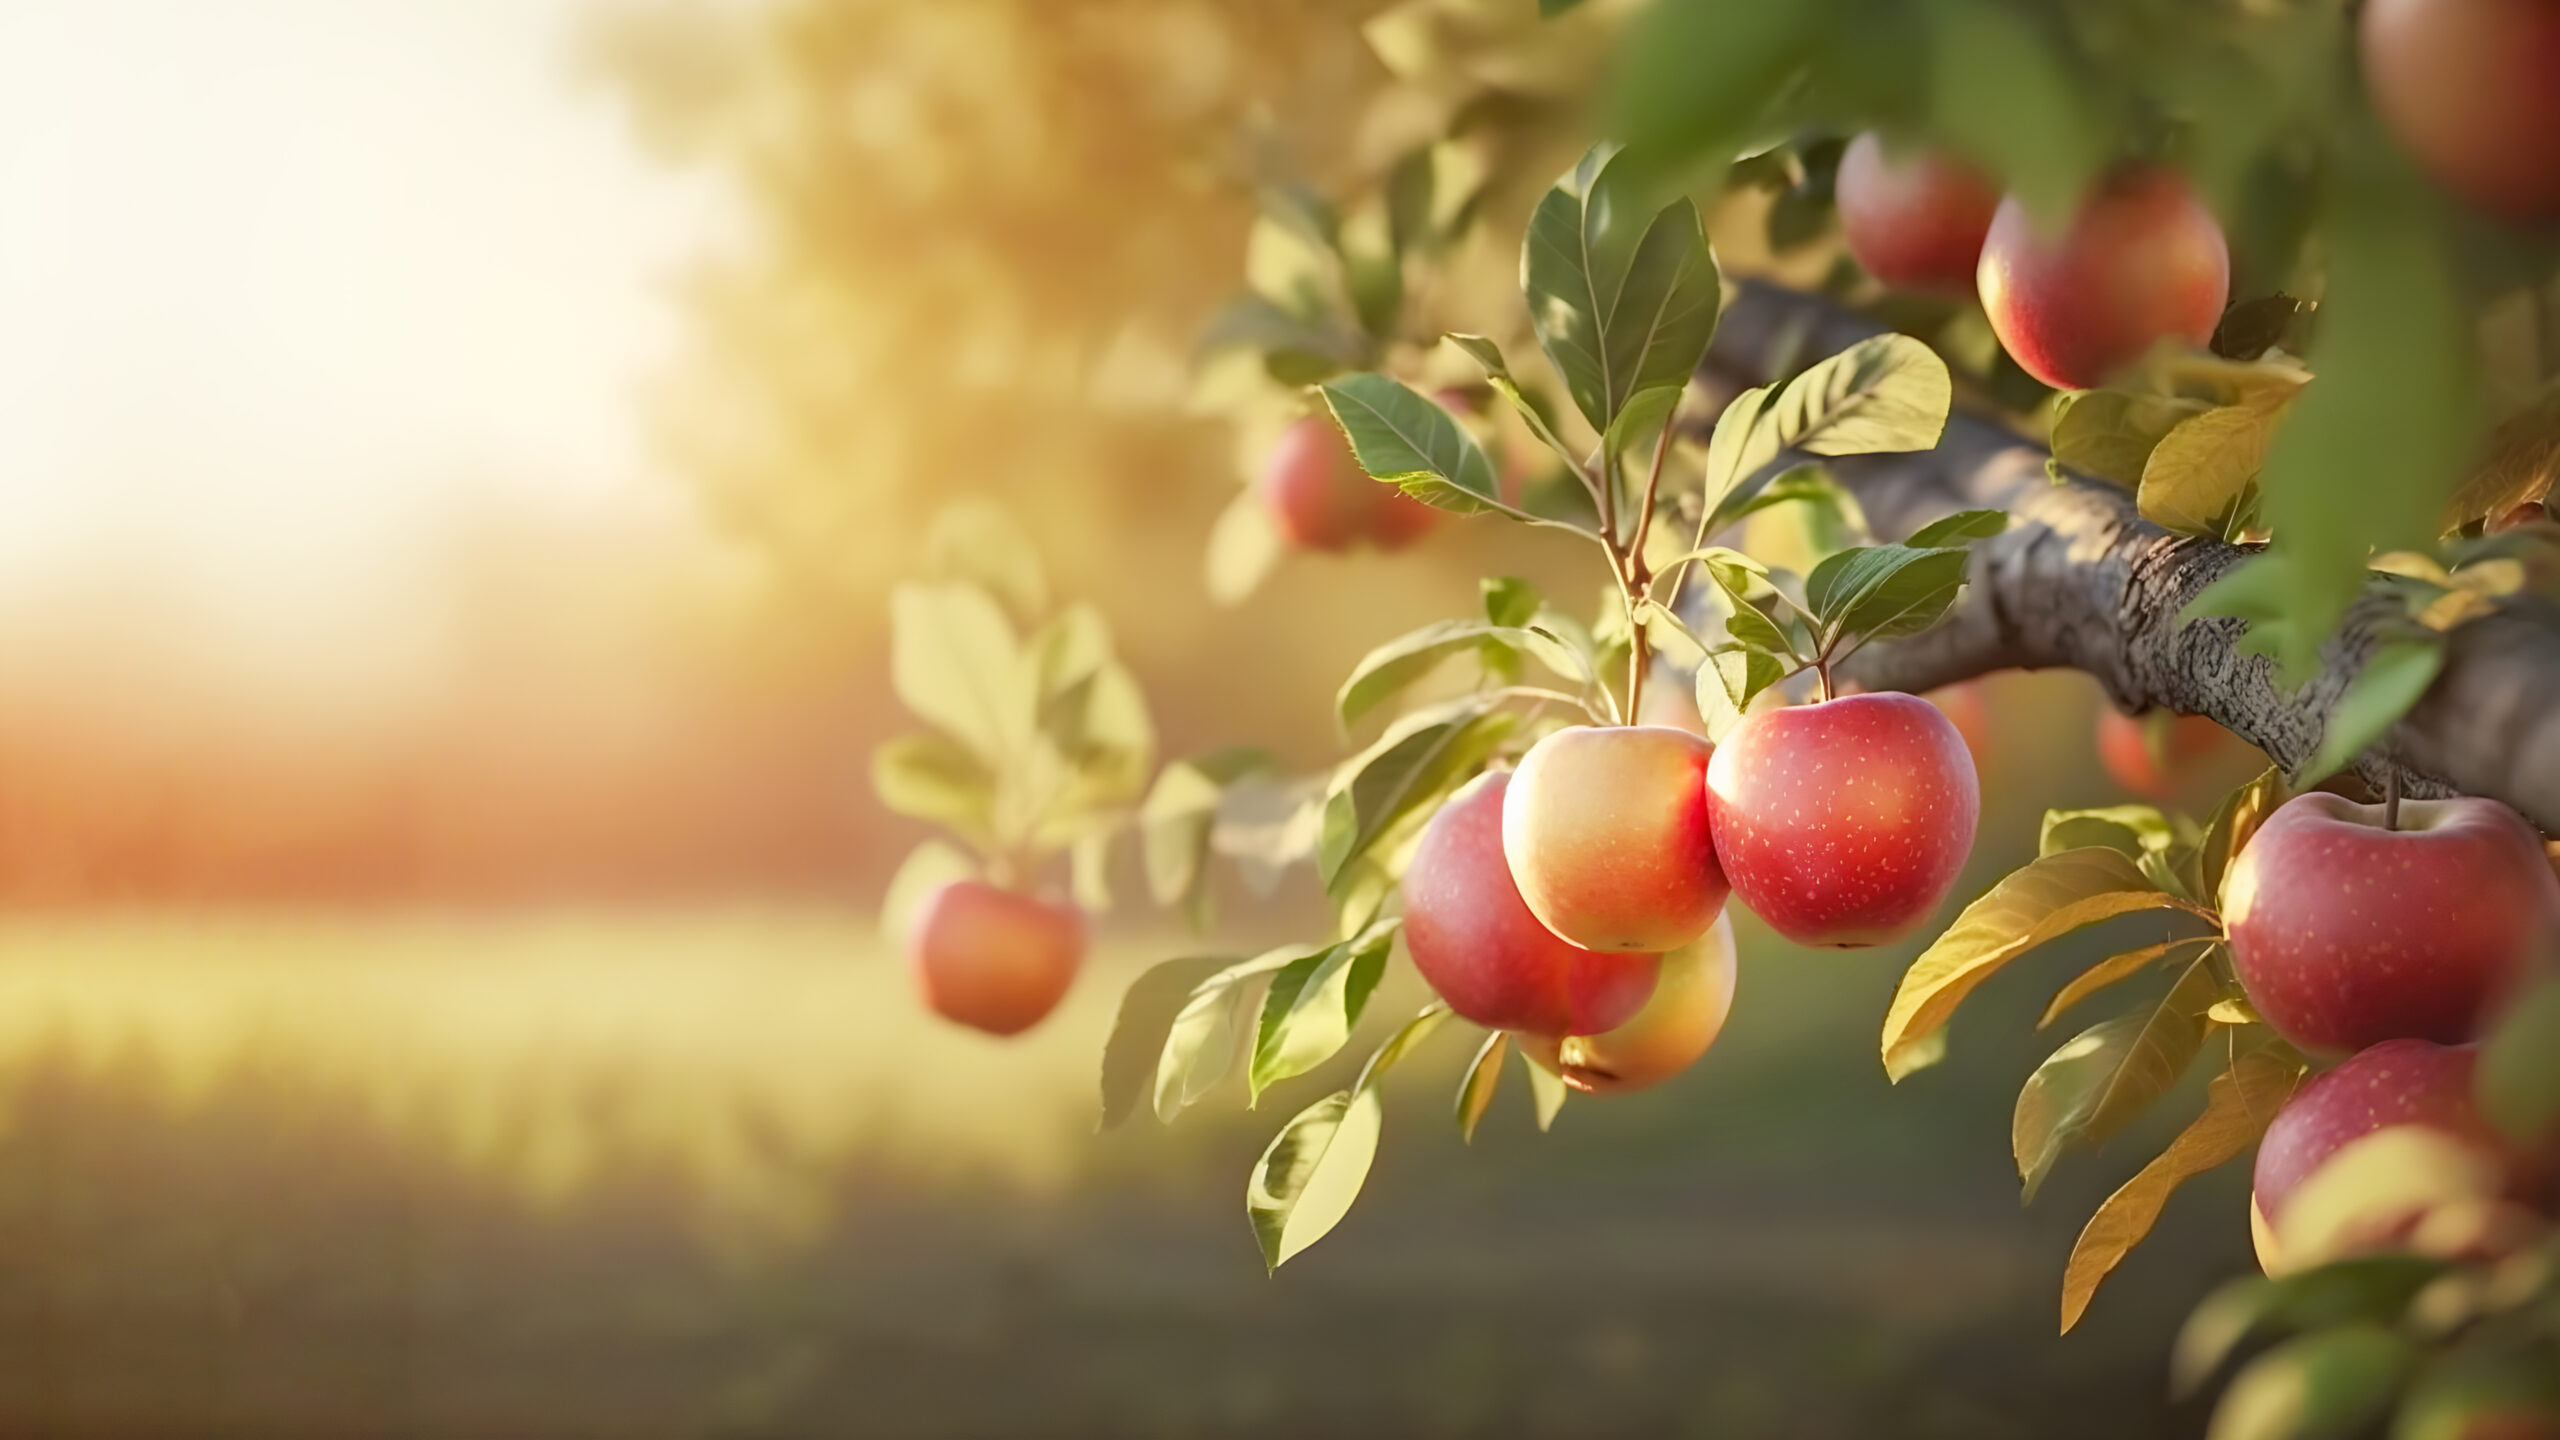 Fruit farm with apple trees. Branch with natural apples on blurr